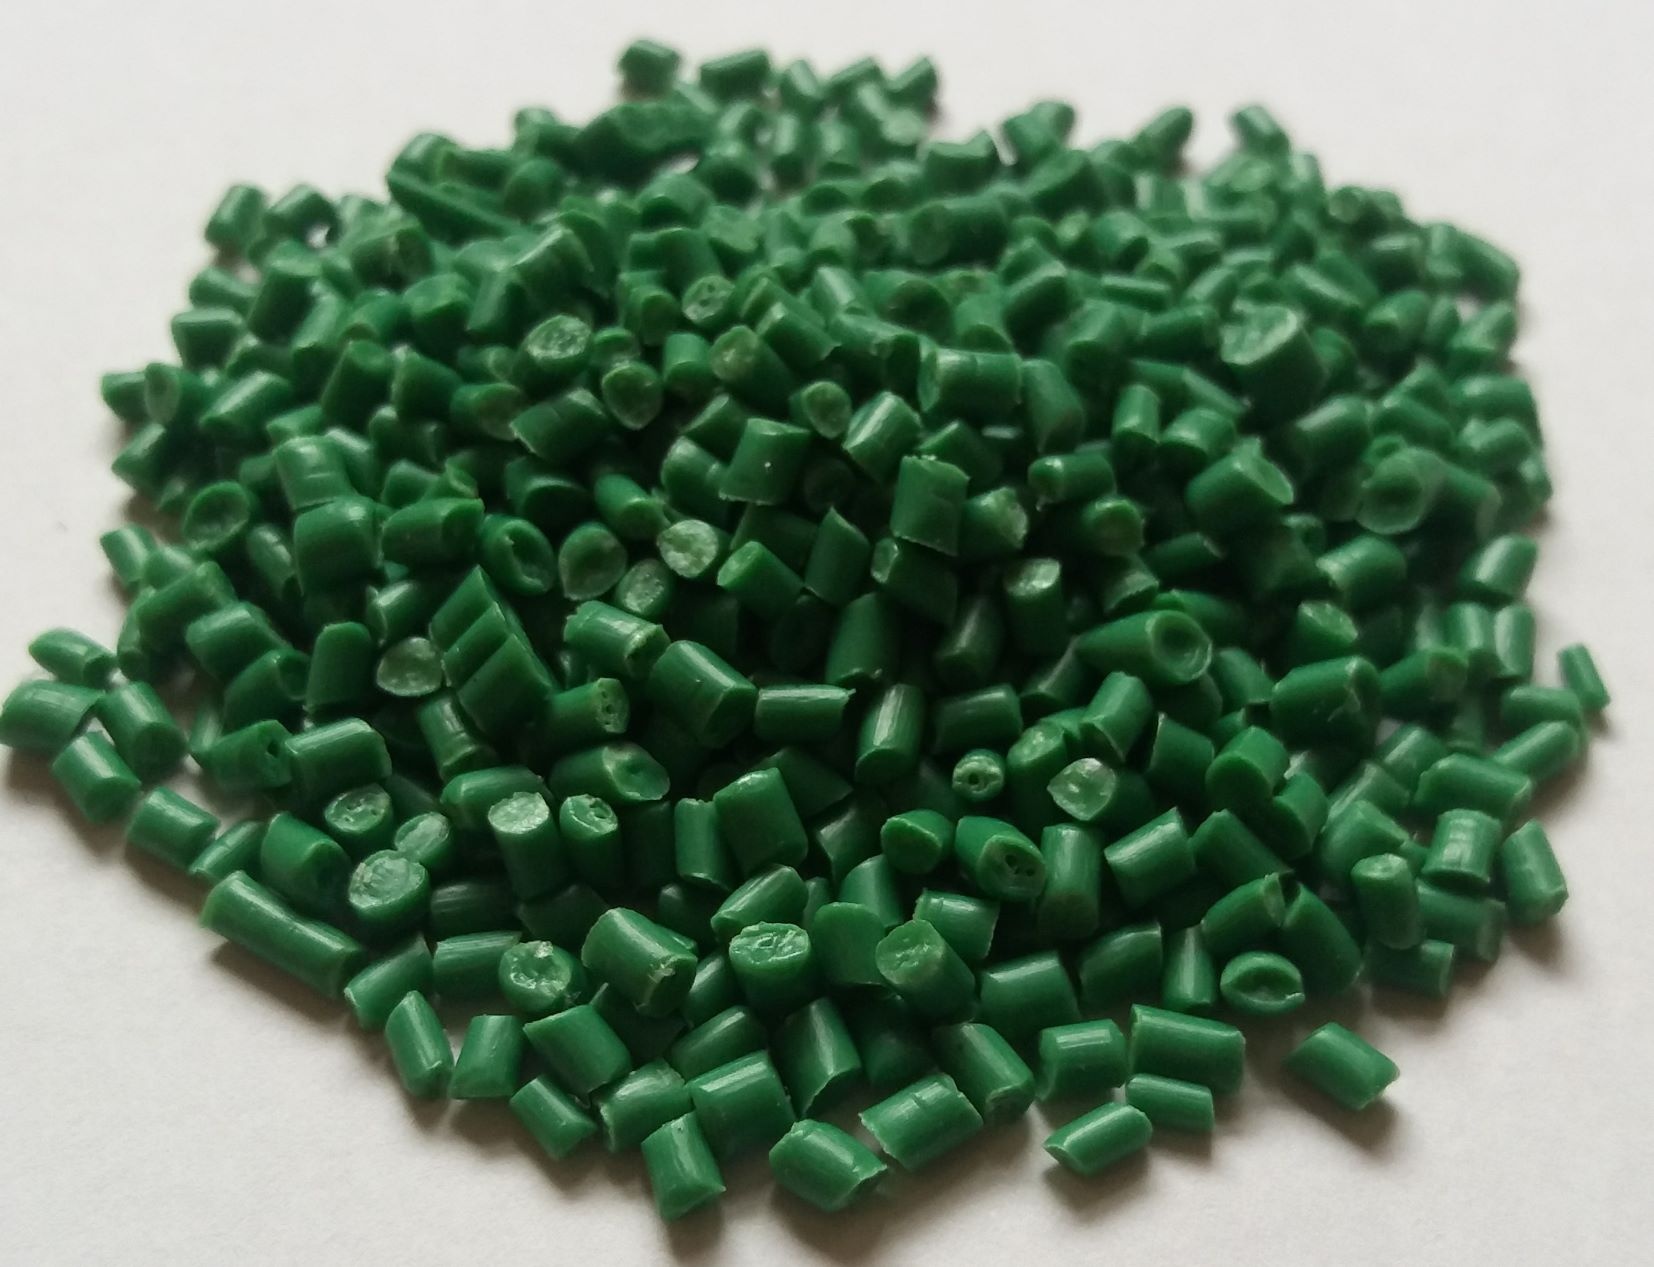 The price of quality recycled plastic beads is being interested - BlueSkyVN